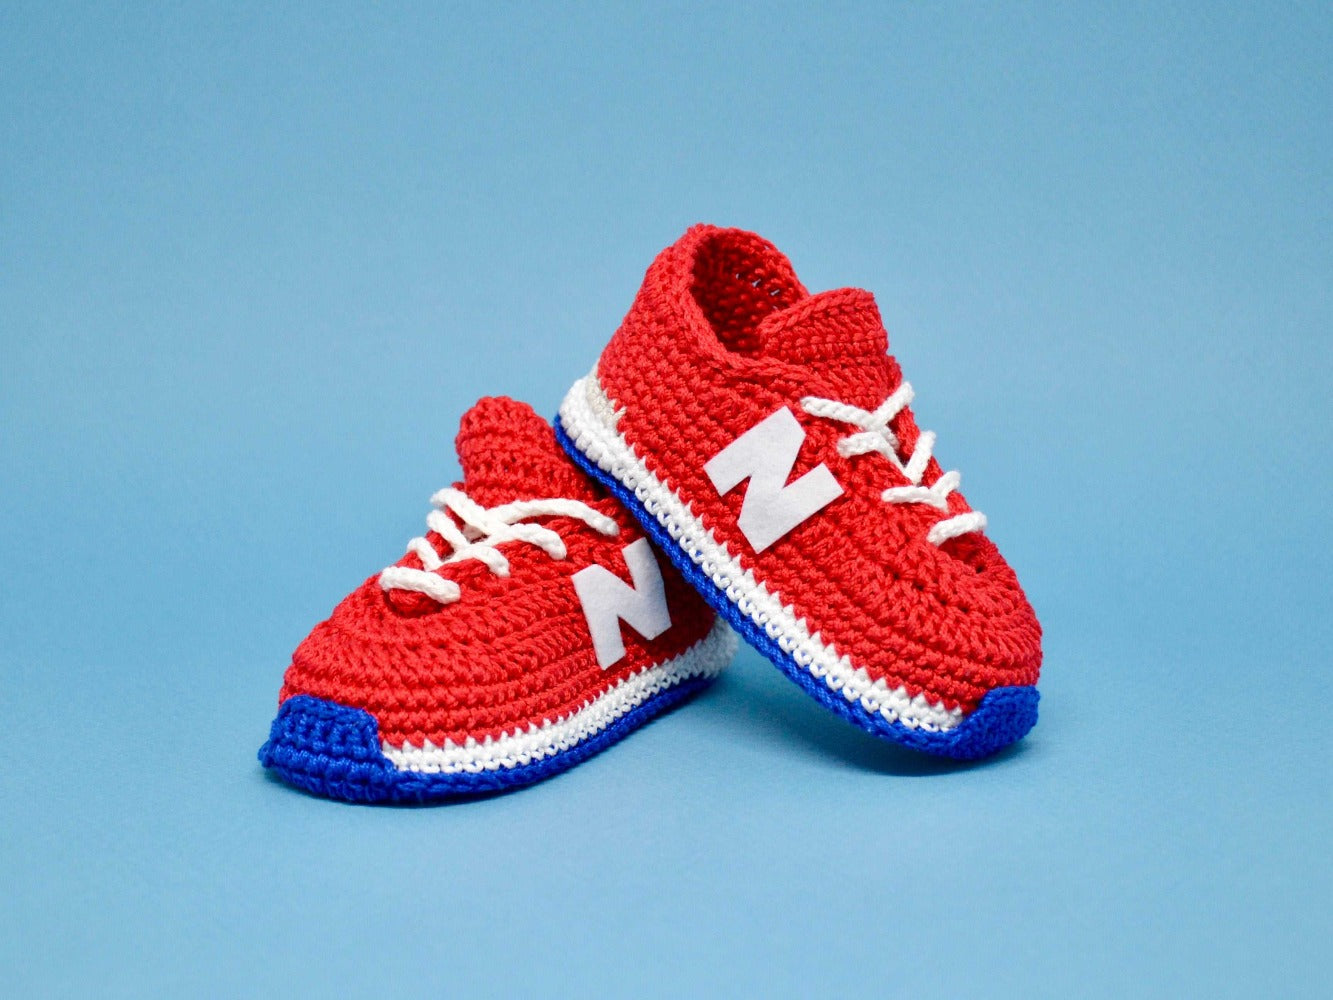 Baby crochet pattern shoes booties 6-9 months NB inspired